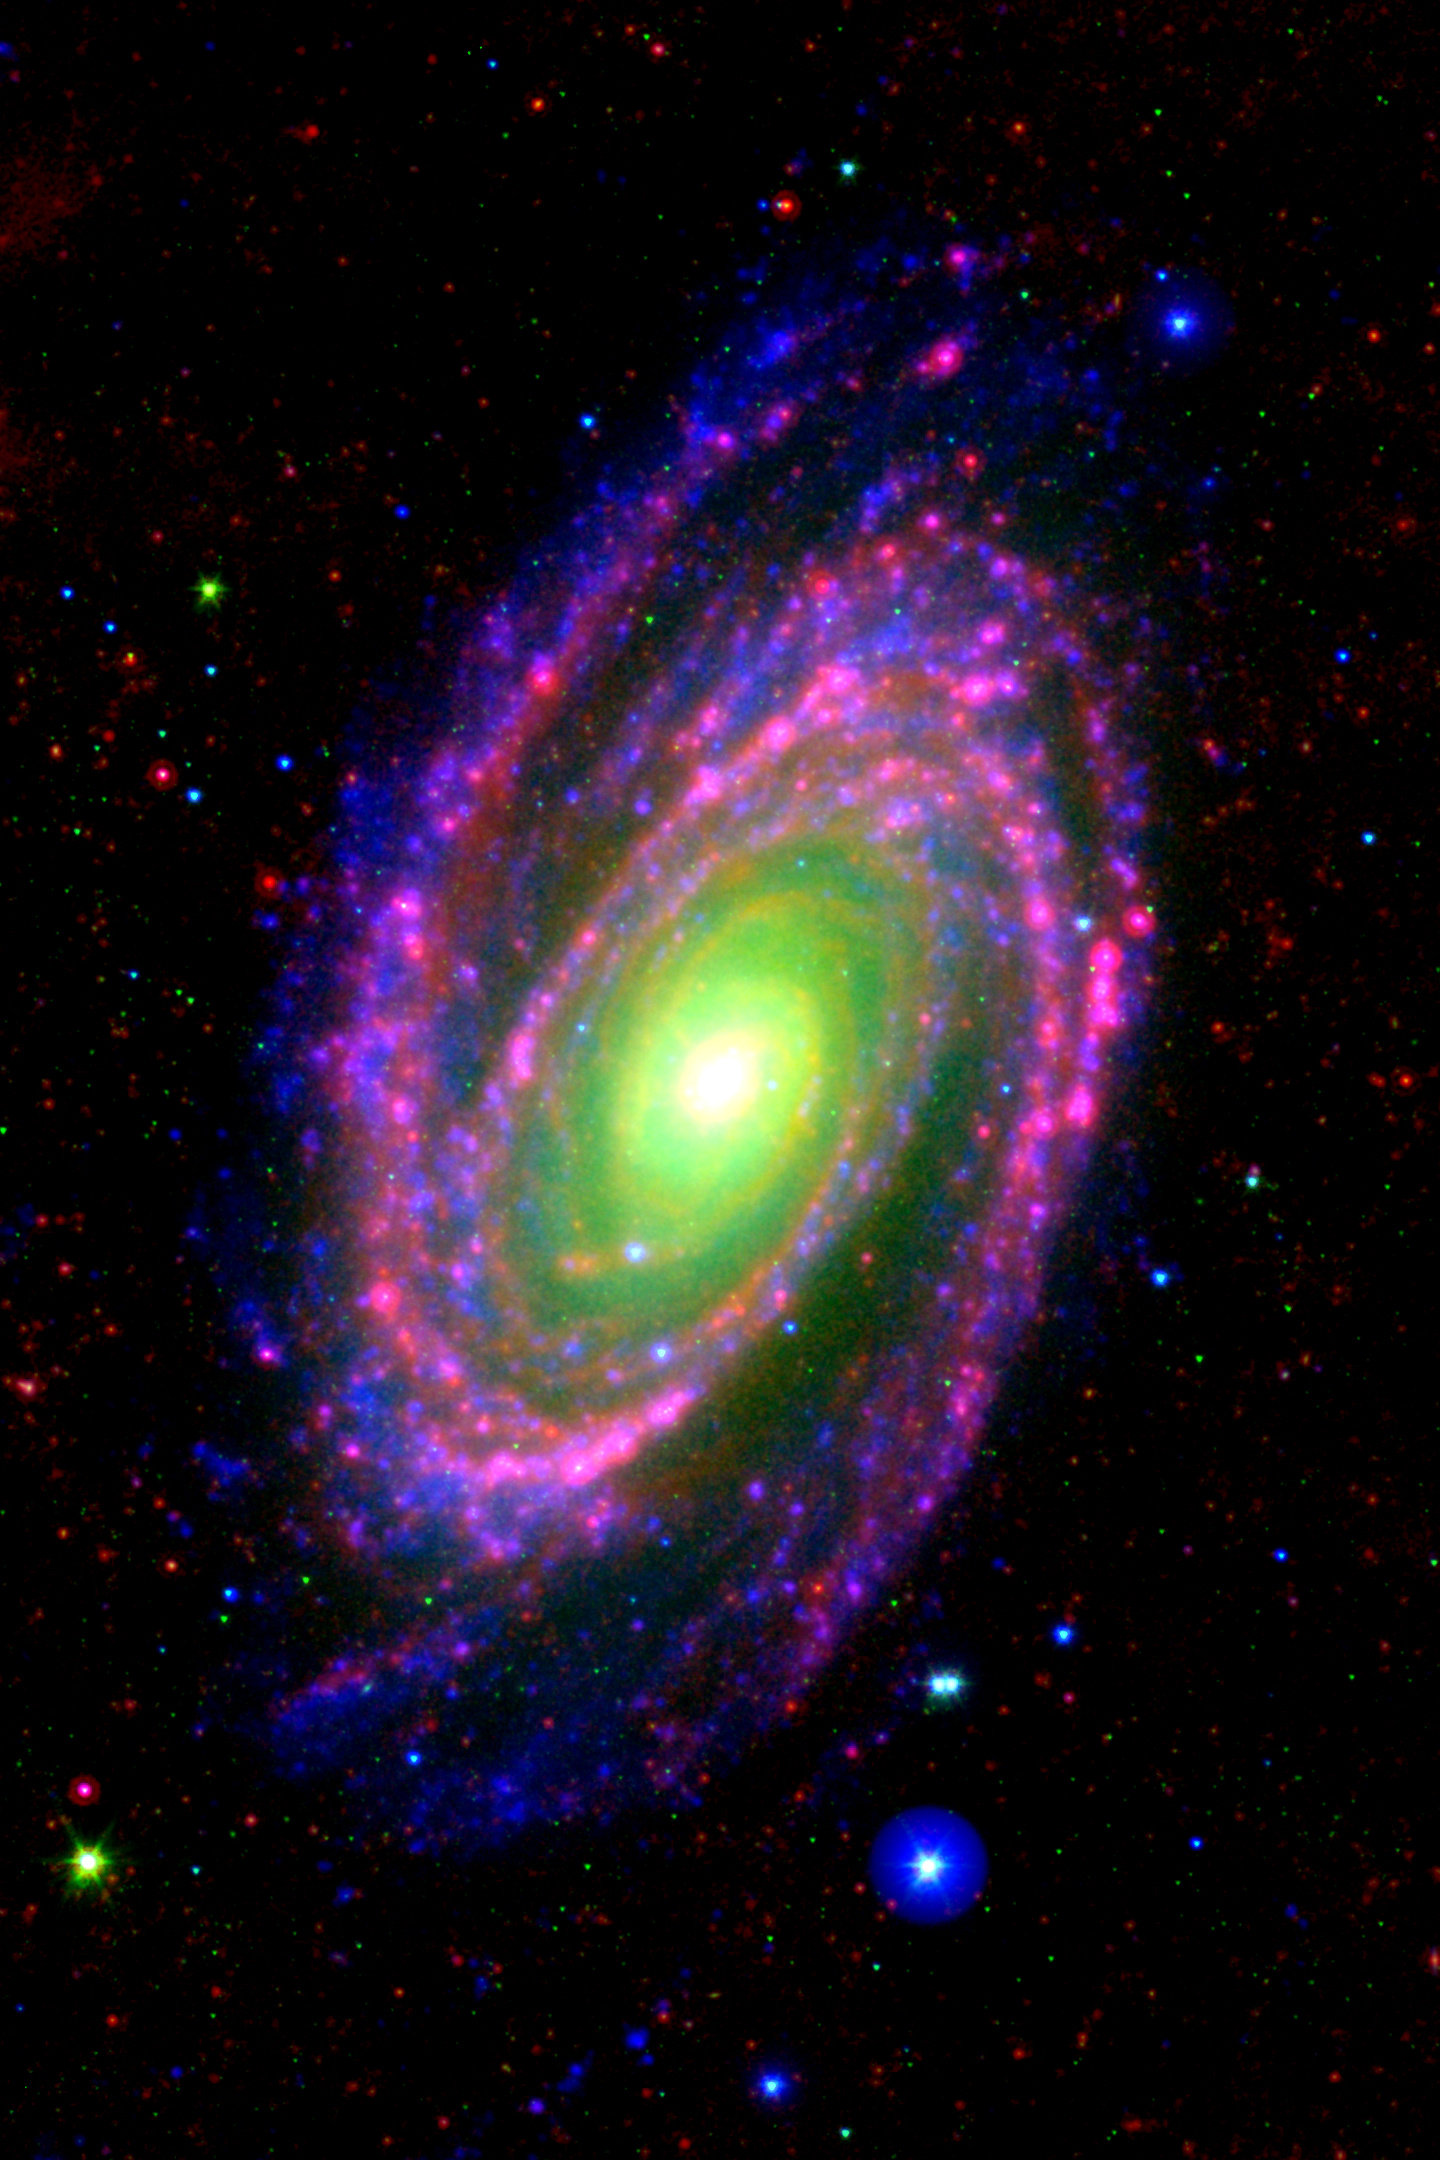 M81 (NGC 3031) as seen in ultraviolet and infrared emission